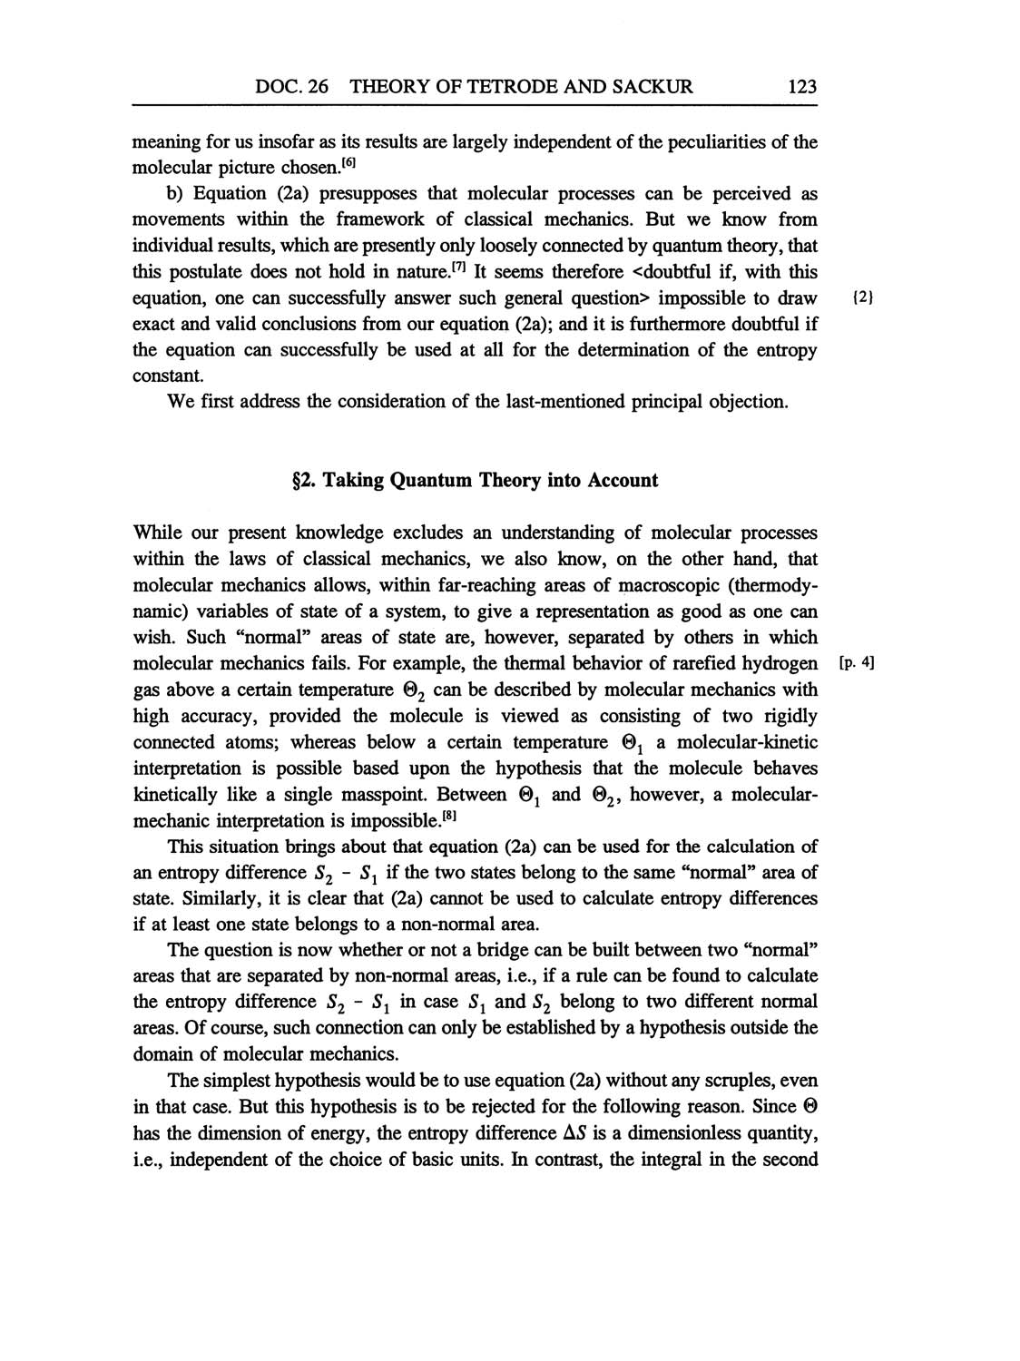 Volume 6: The Berlin Years: Writings, 1914-1917 (English translation supplement) page 123